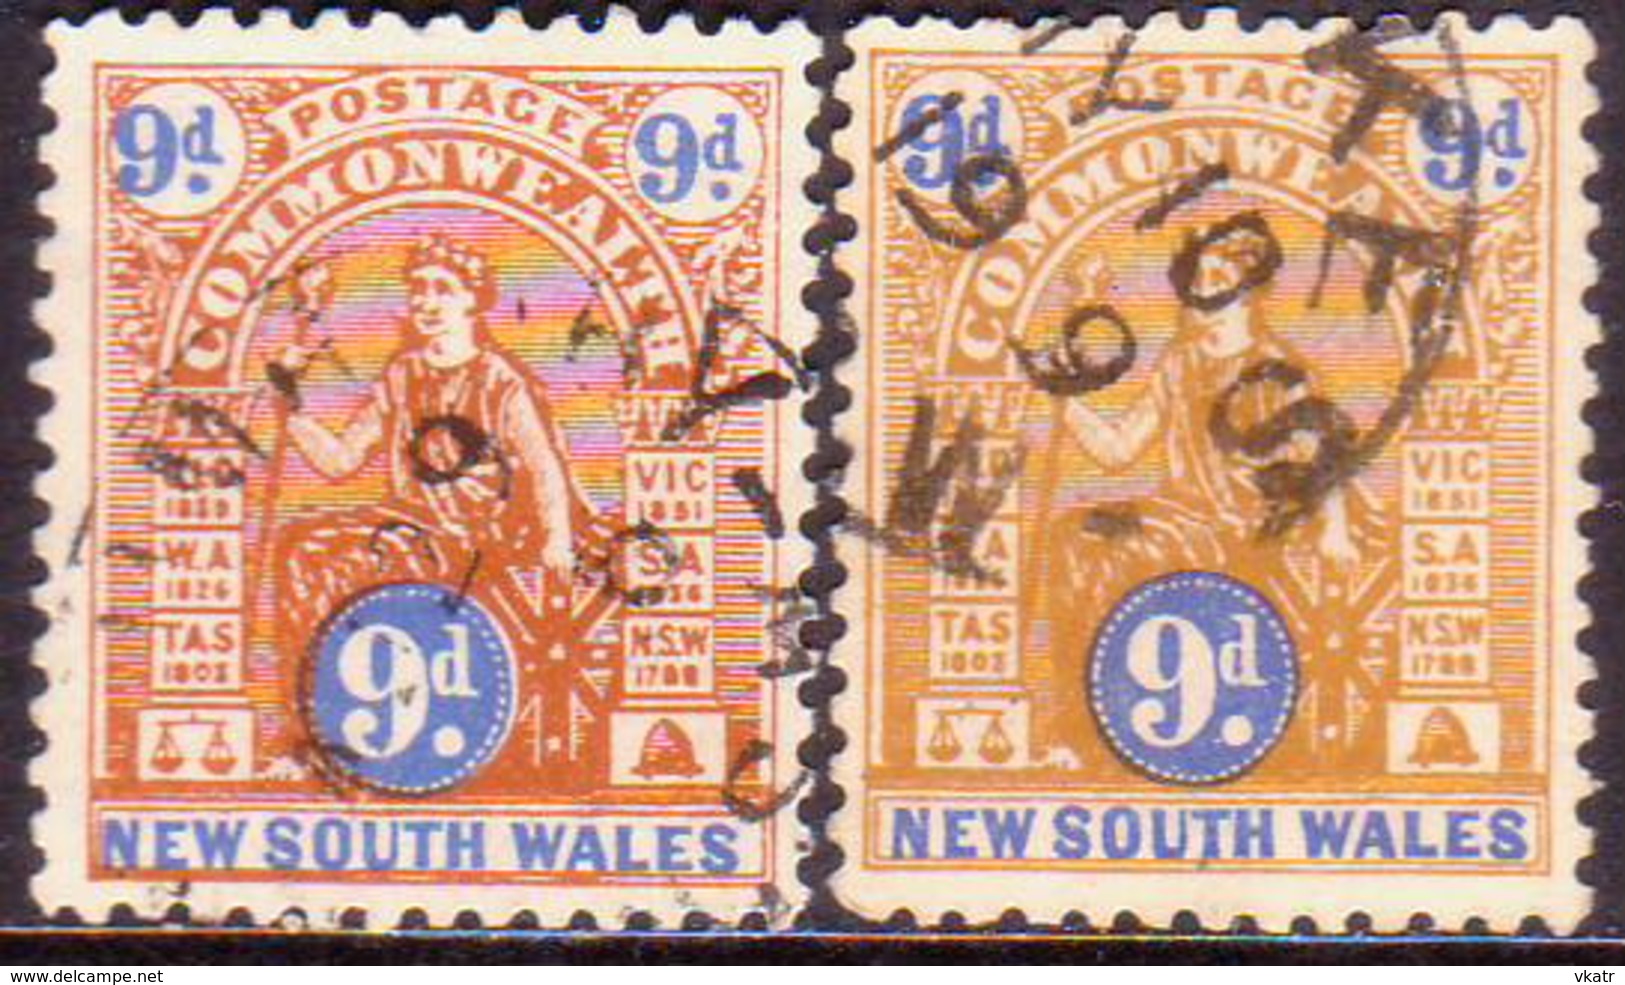 AUSTRALIA NEW SOUTH WALES 1905 SG #351-52 9d Used Two Shades Wmk Double-lined "A" And Crown - Used Stamps